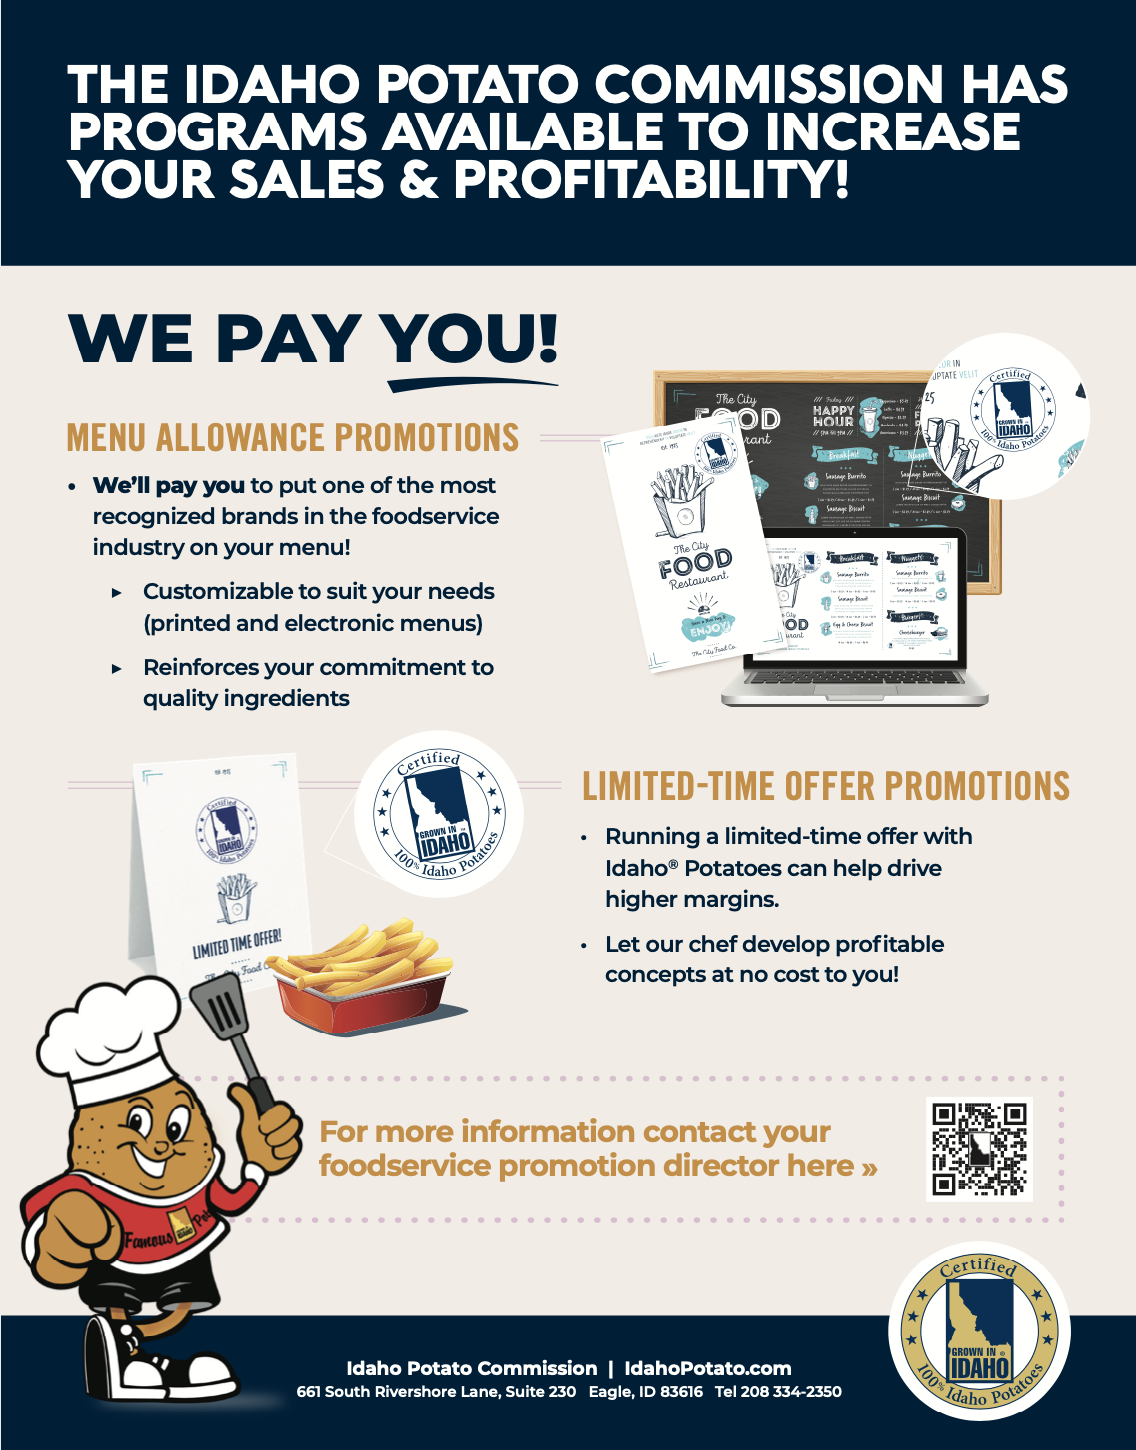 Increase Your Sales and Profitability